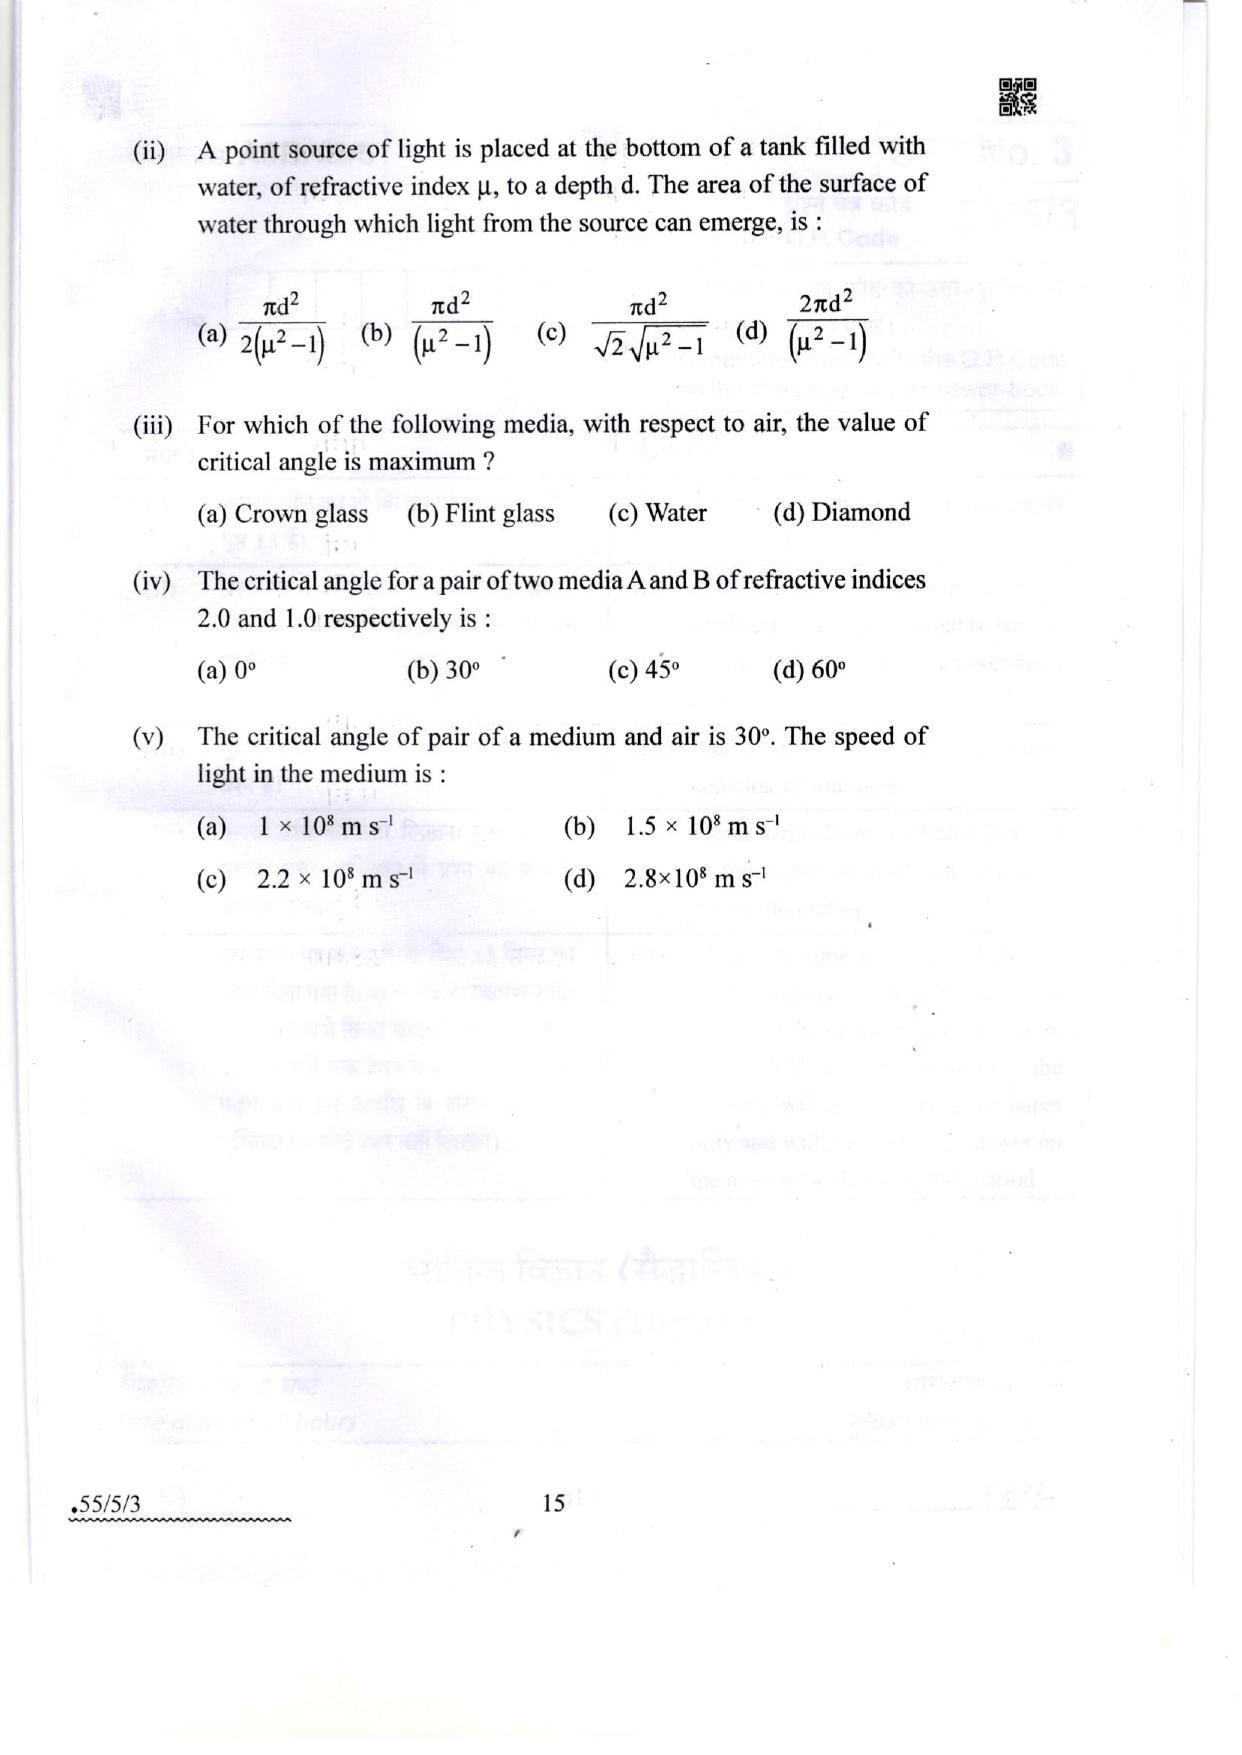 CBSE Class 12 55-5-3 Physics 2022 Question Paper - Page 15